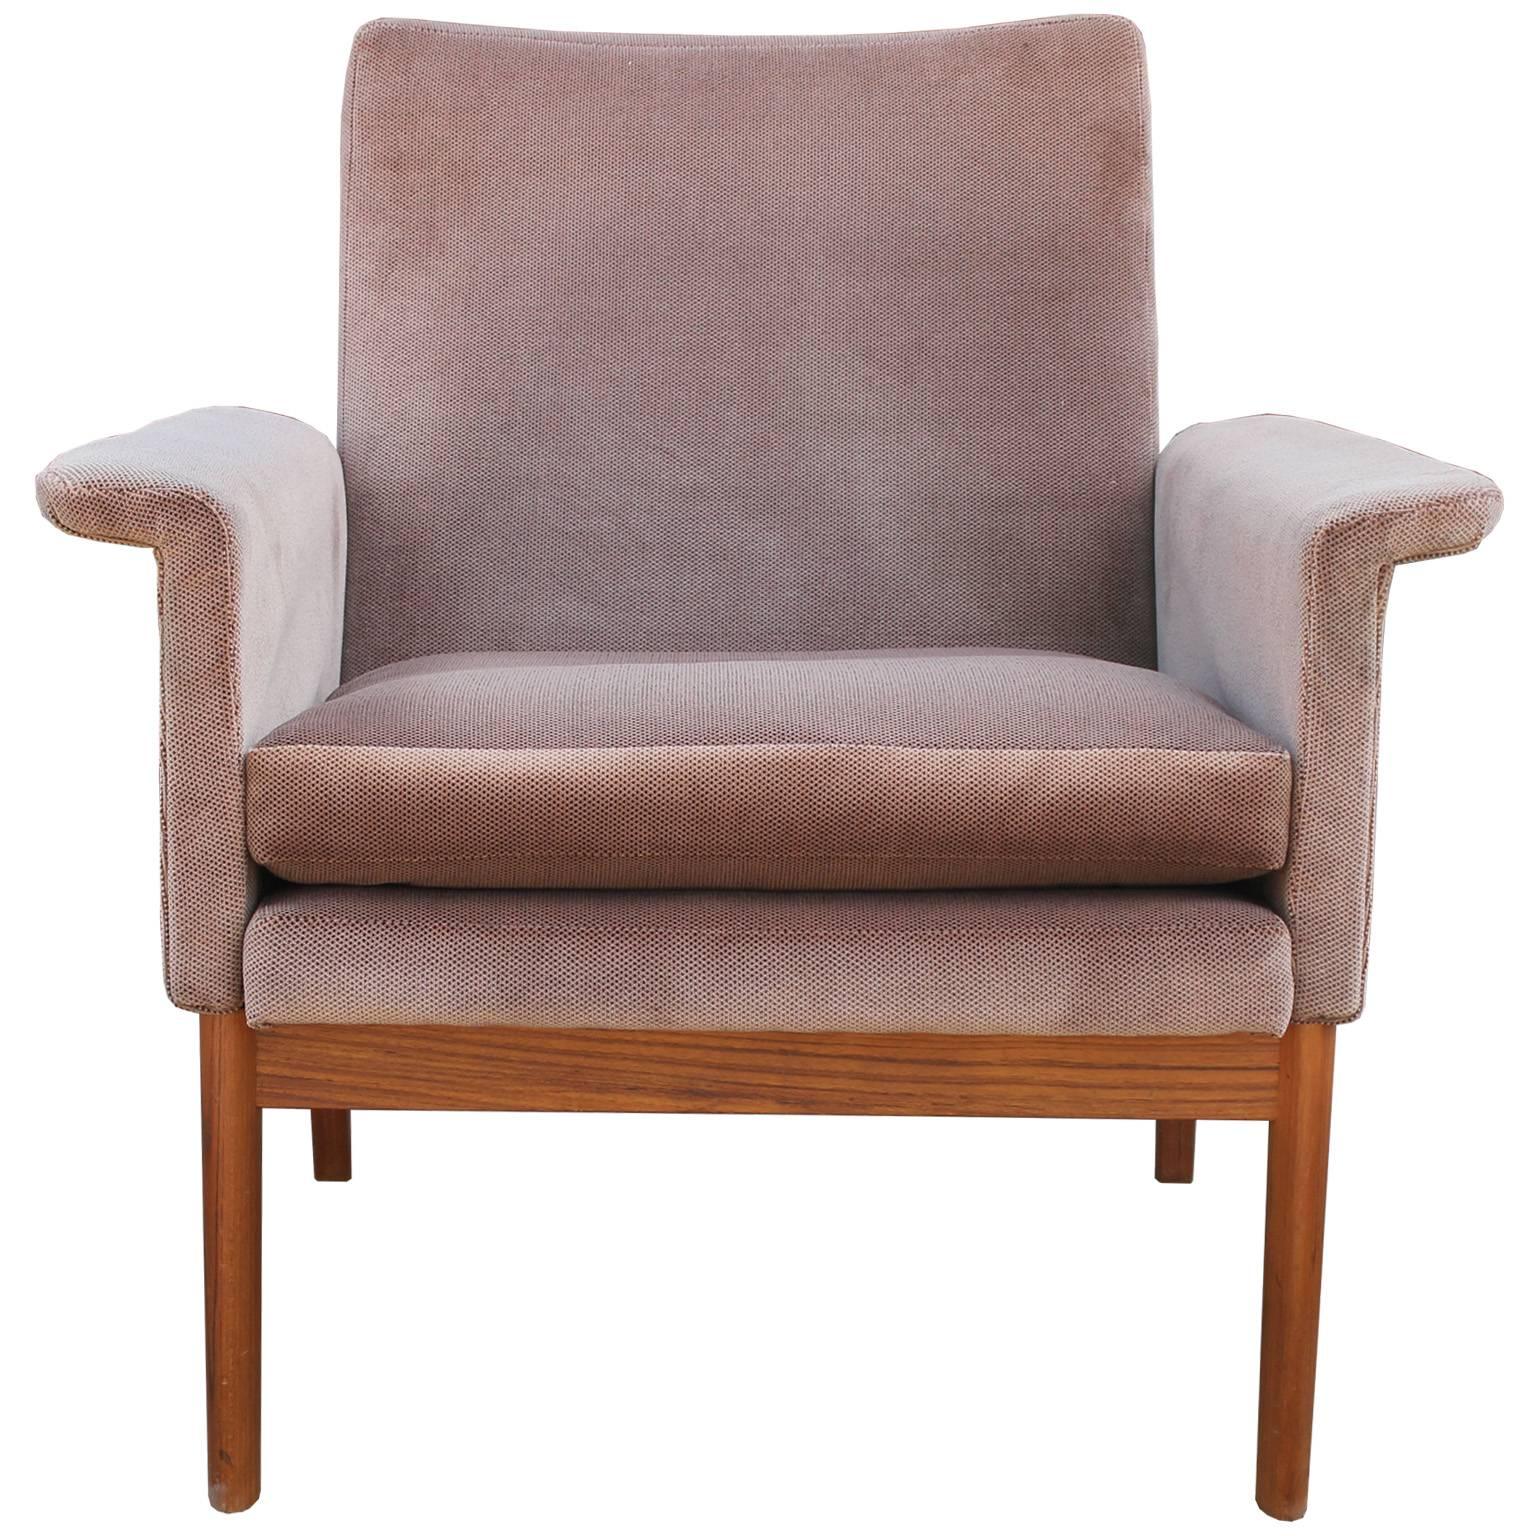 Wonderful lounge chair by John Stuart Inc and France and Daverkosen. Chair has excellent lines with bent out arm rests. Teak base has excellent negative space. Upholstered in a pale mauve vintage velvet.